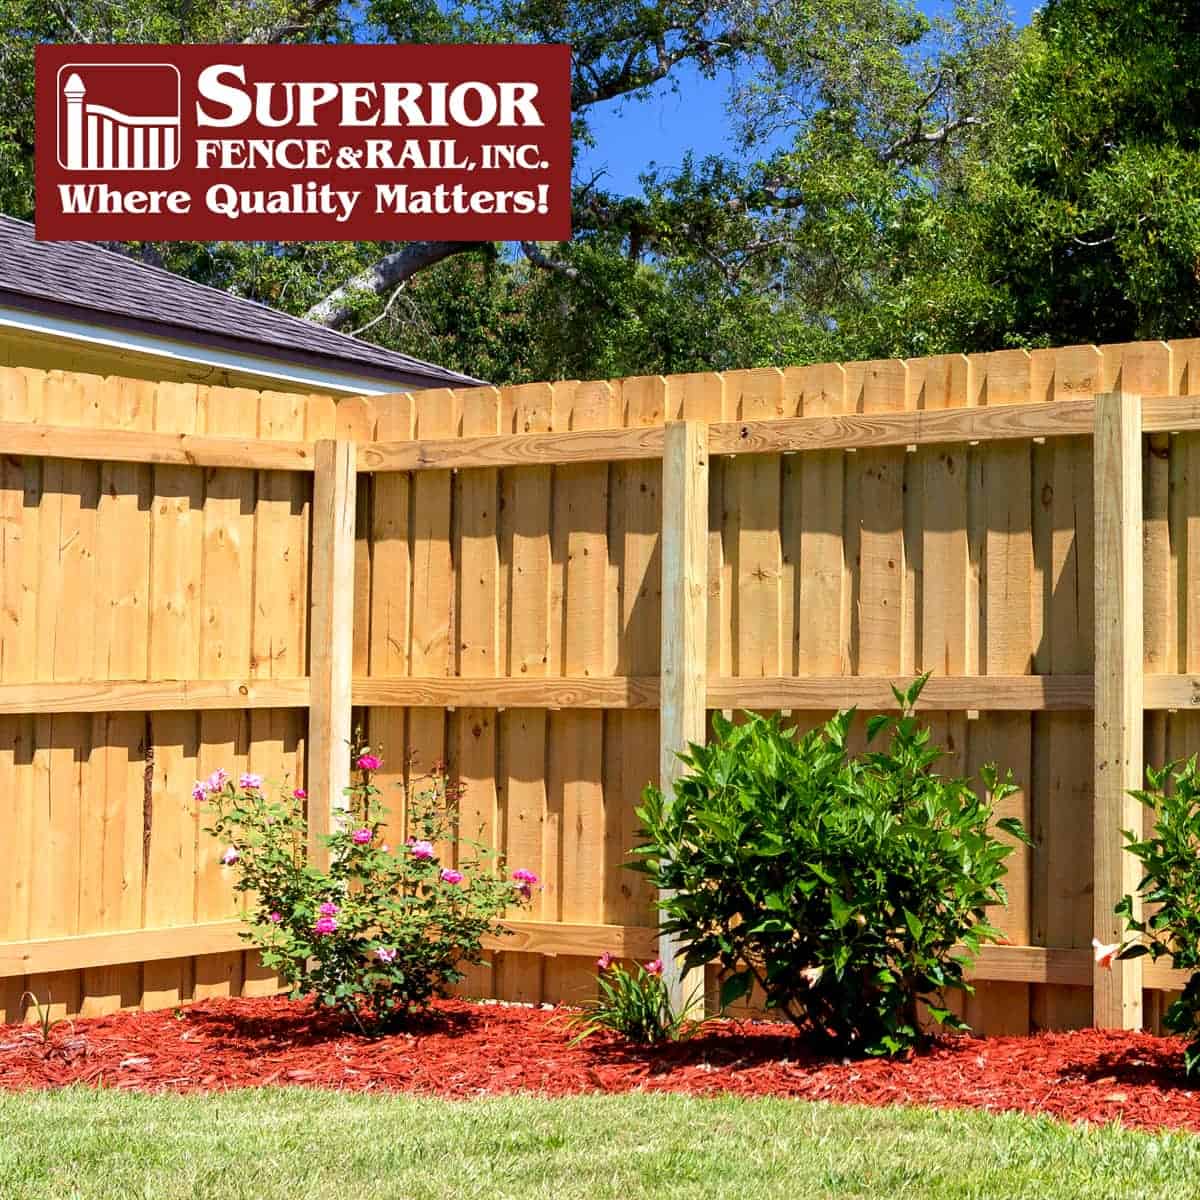 https://www.superiorfenceandrail.com/wp-content/uploads/2023/01/Los-Gatos-Fence-Company-Contractor.jpg